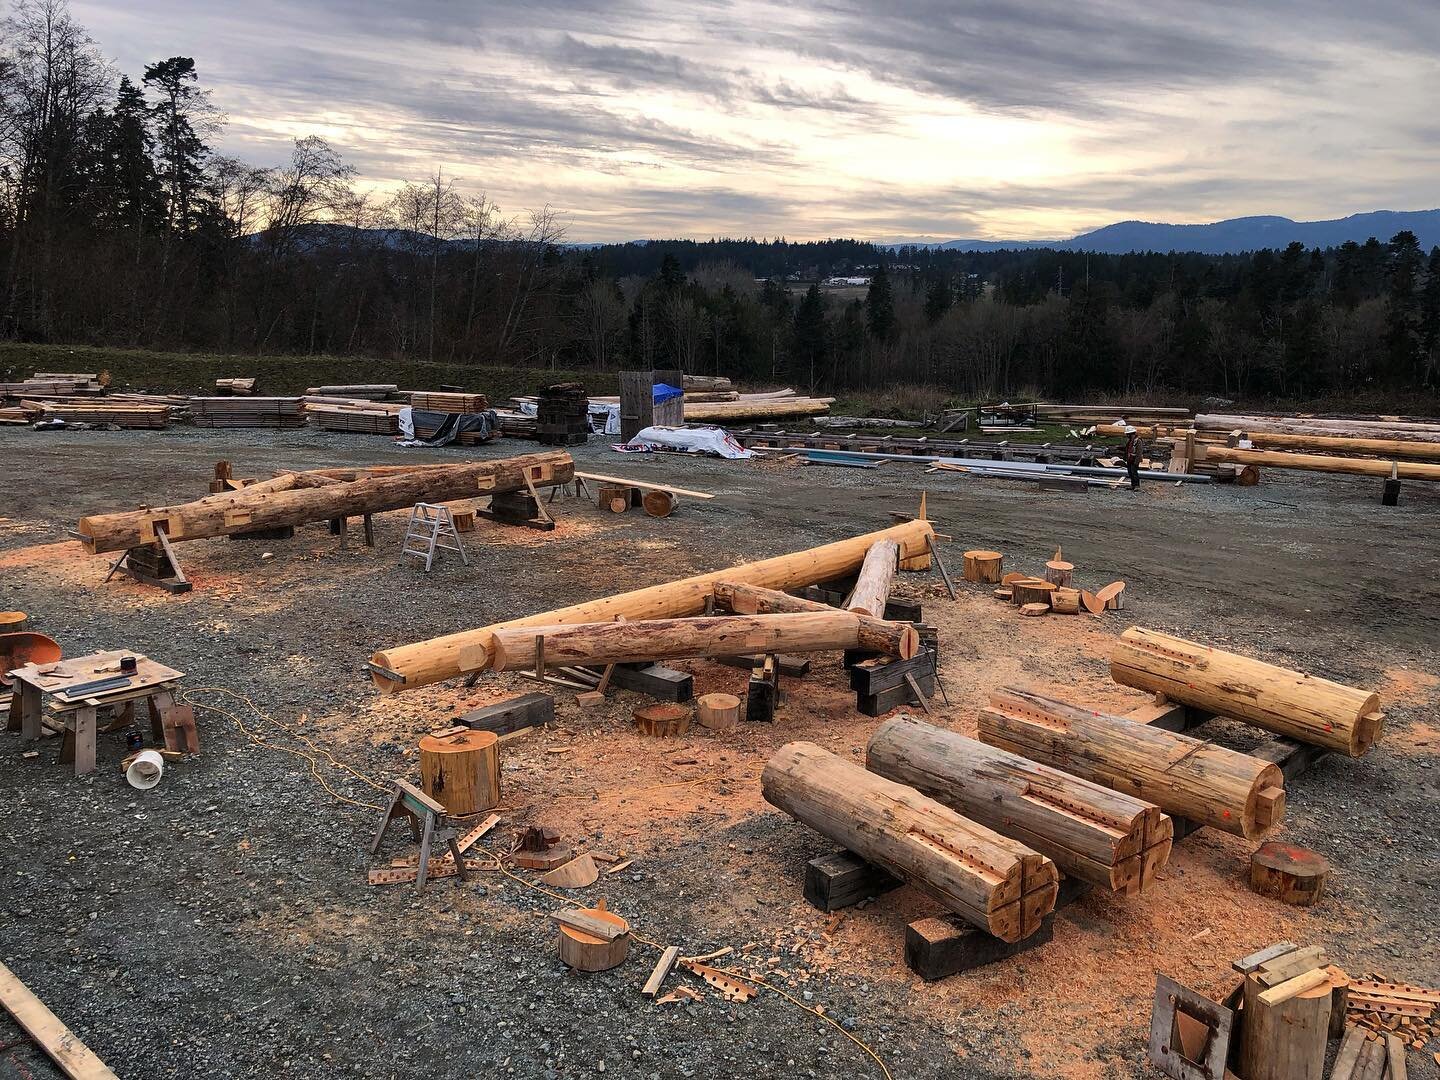 Trusses are dry fitted and posts are prepped, ready to be taken apart for transport and then installed. 
.
.
.
.
.
#timberframe#heavytimbers#timberframestructure#roundlog#logbuilding#carpentry#engineering#architecture#timber#postandbeam#cedar#fir#ins